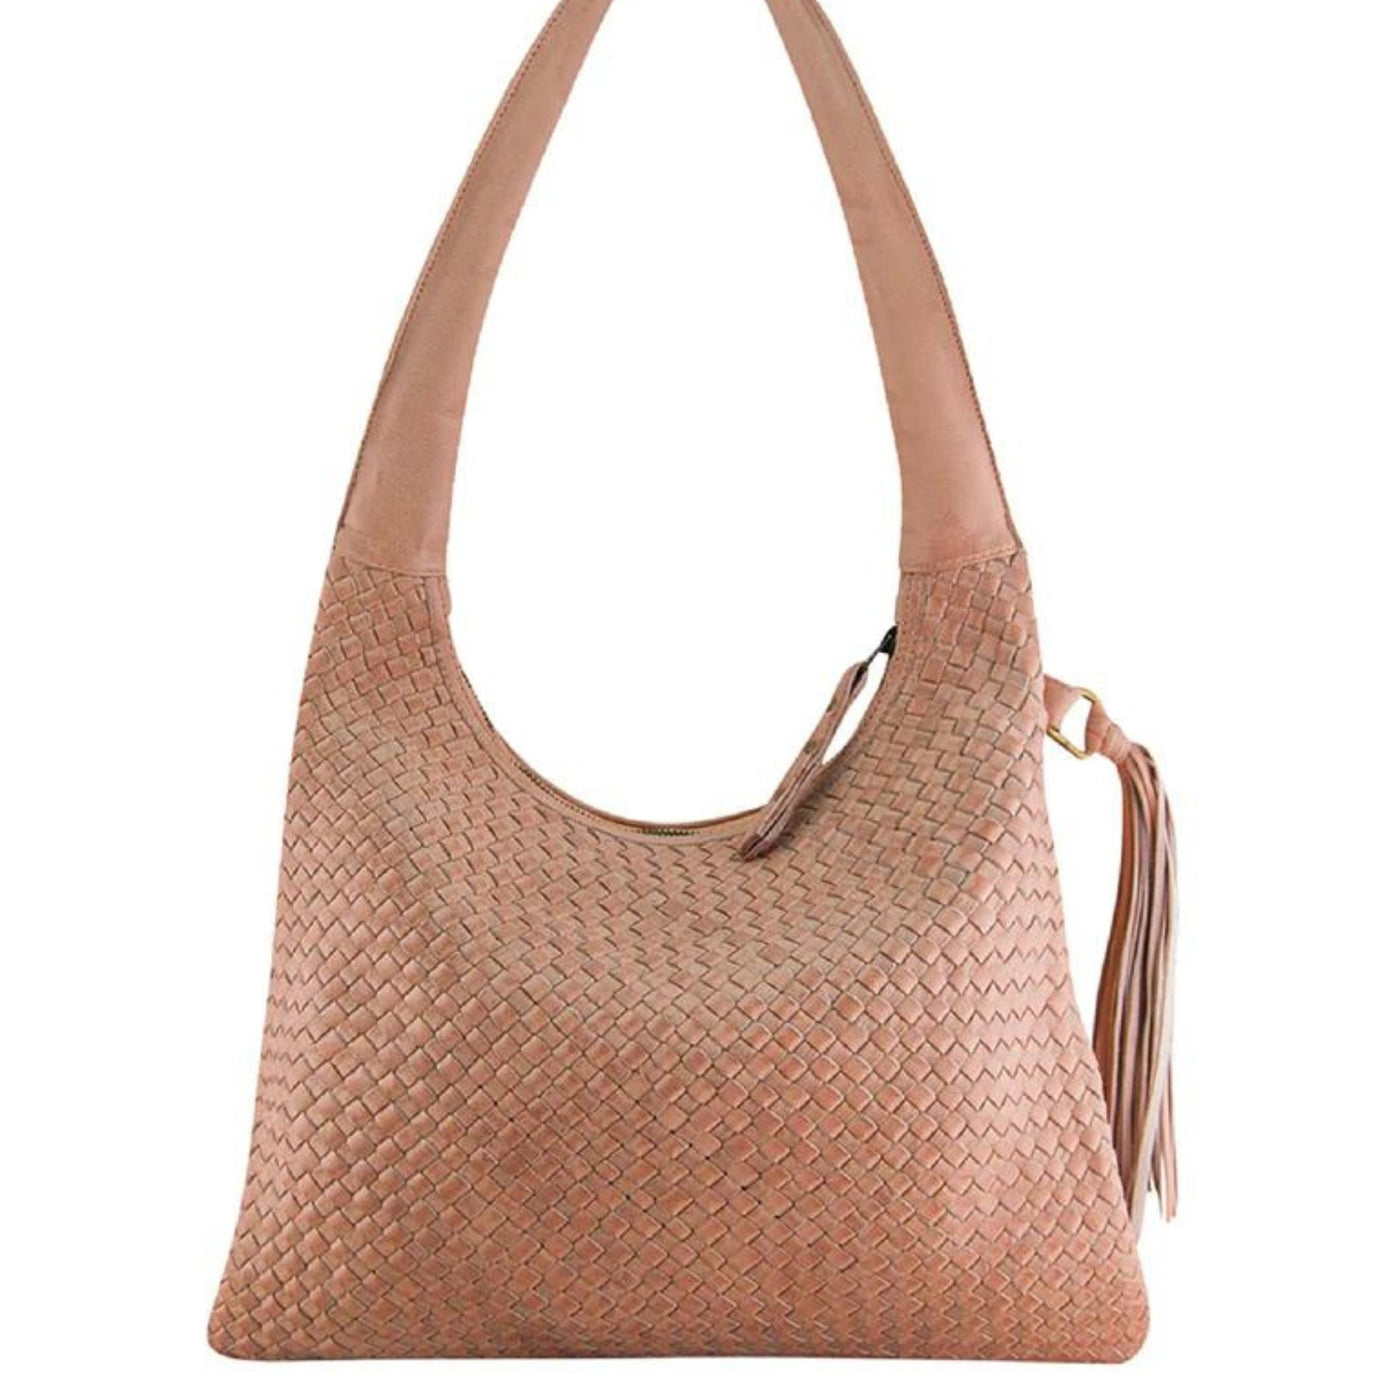 Maxine Tote Misty Rose